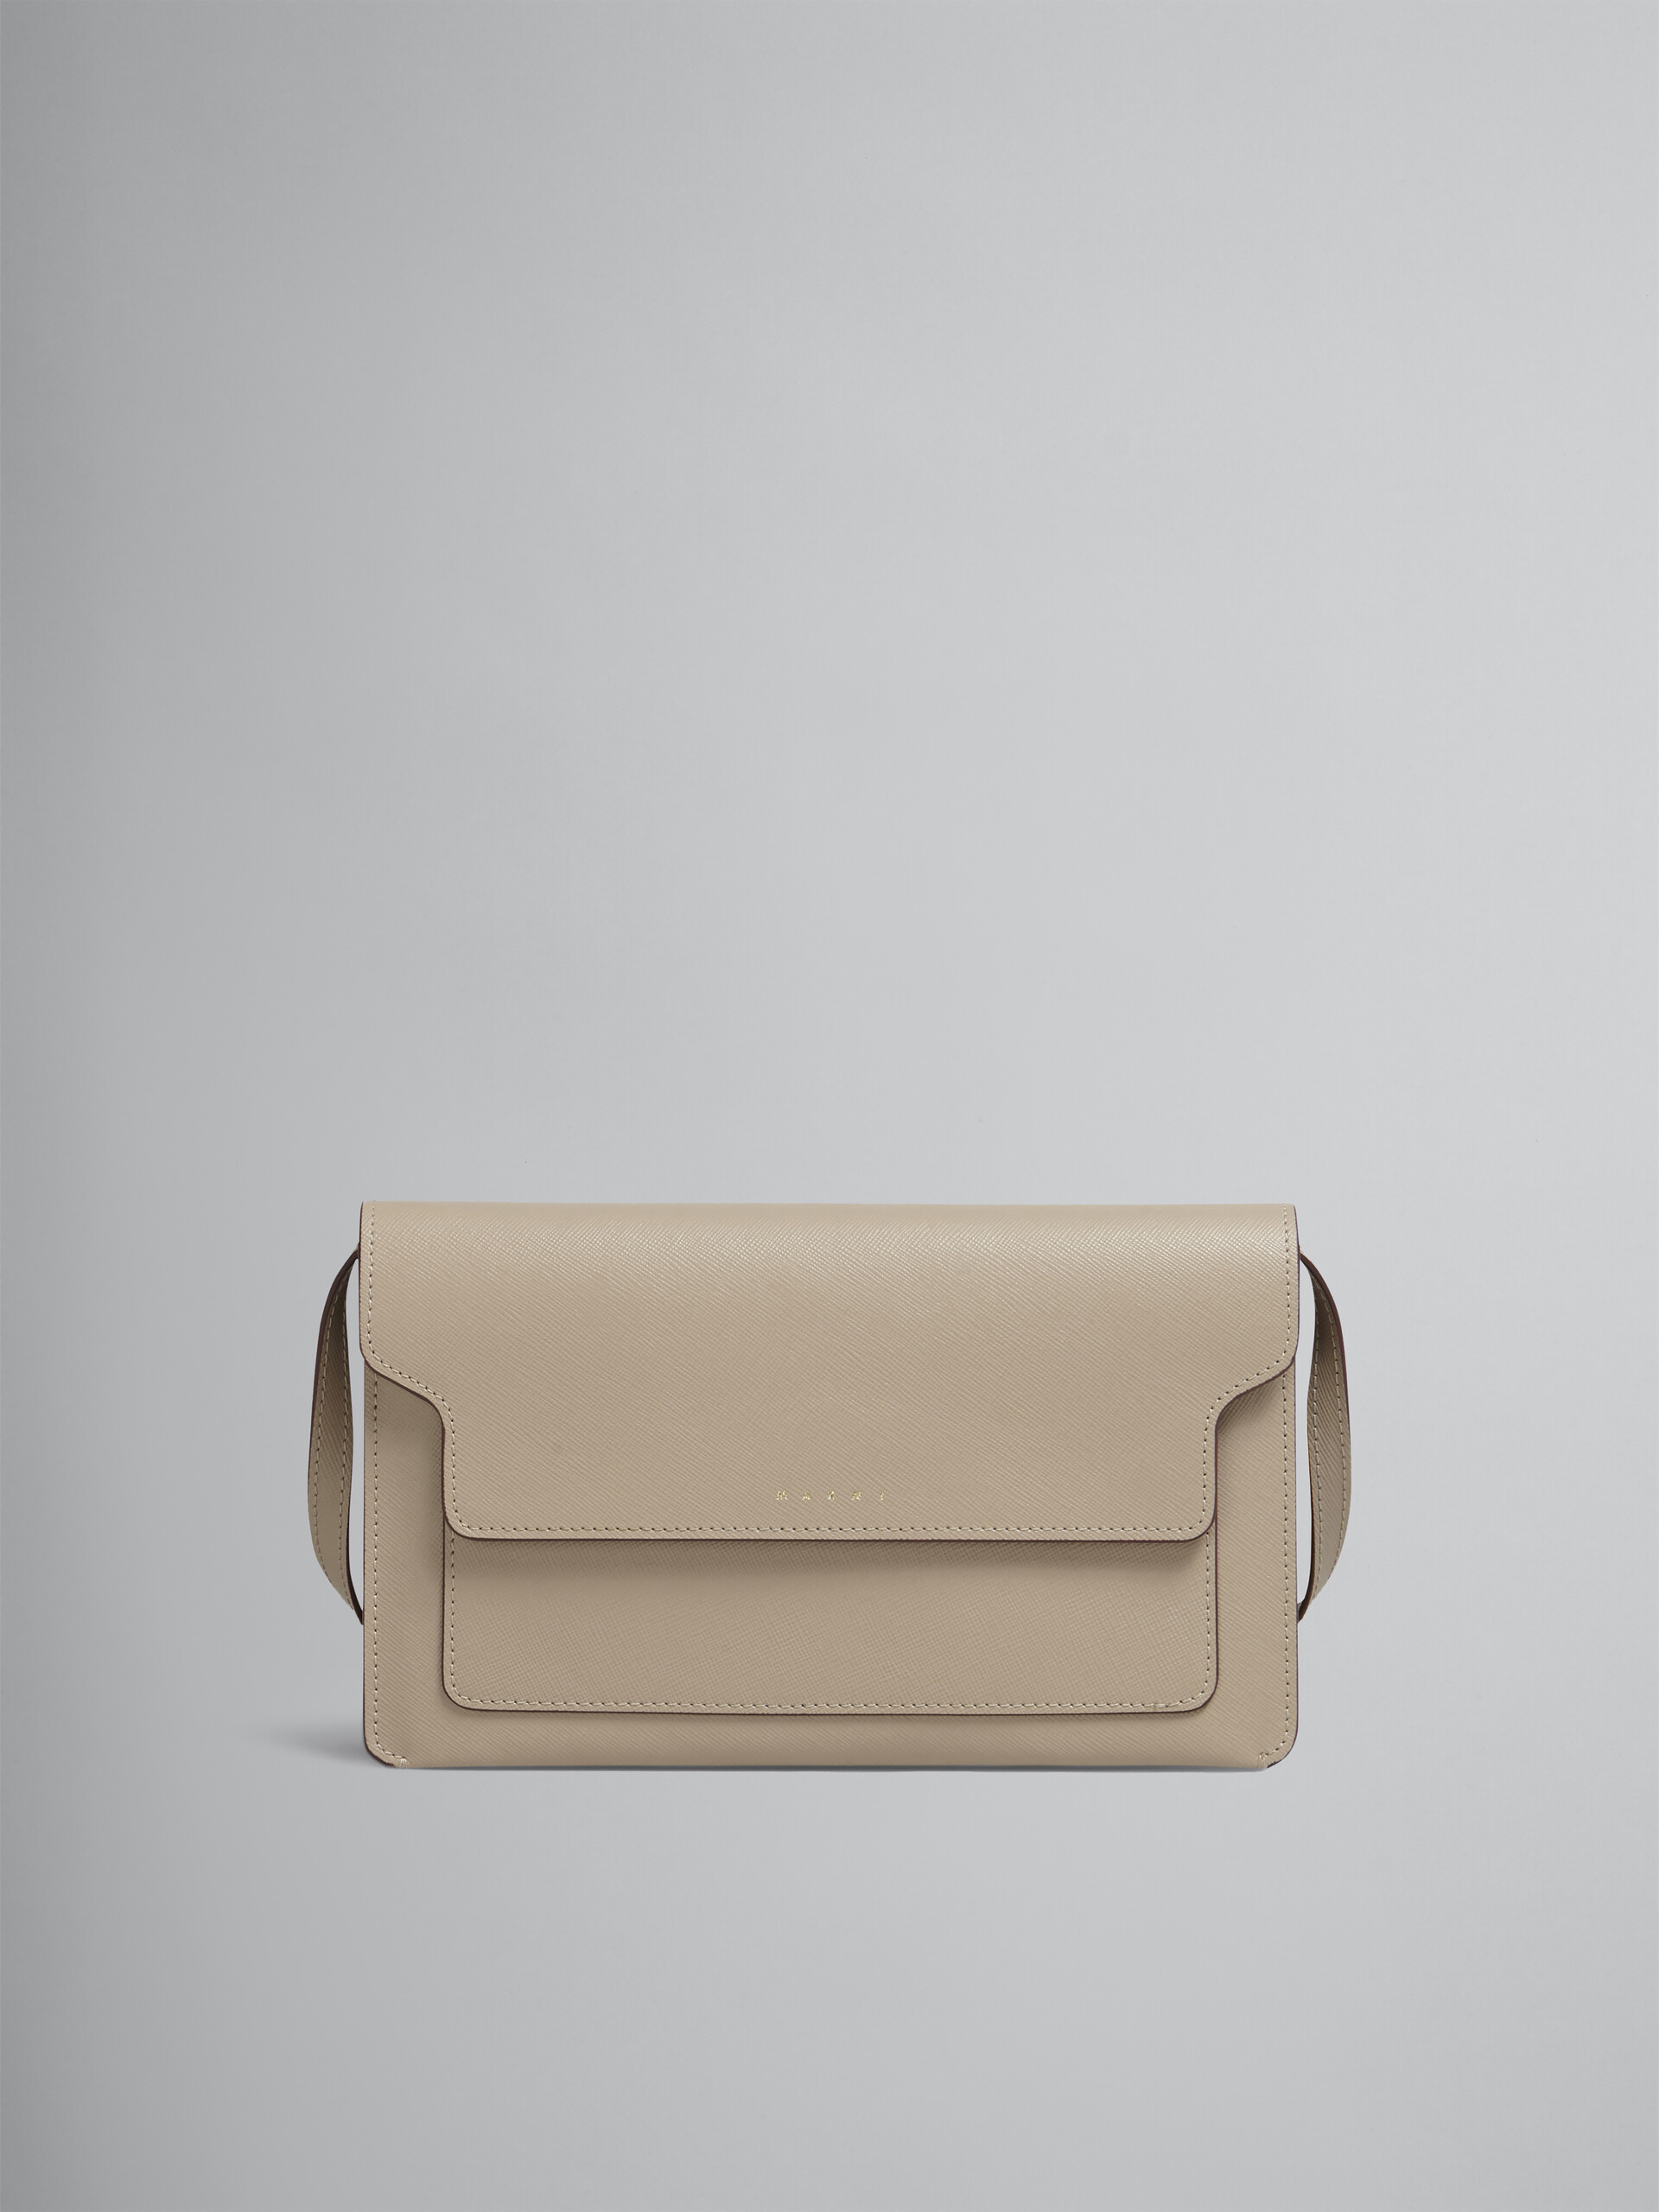 TRUNK clutch bag in beige saffiano leather - Pochettes - Image 1